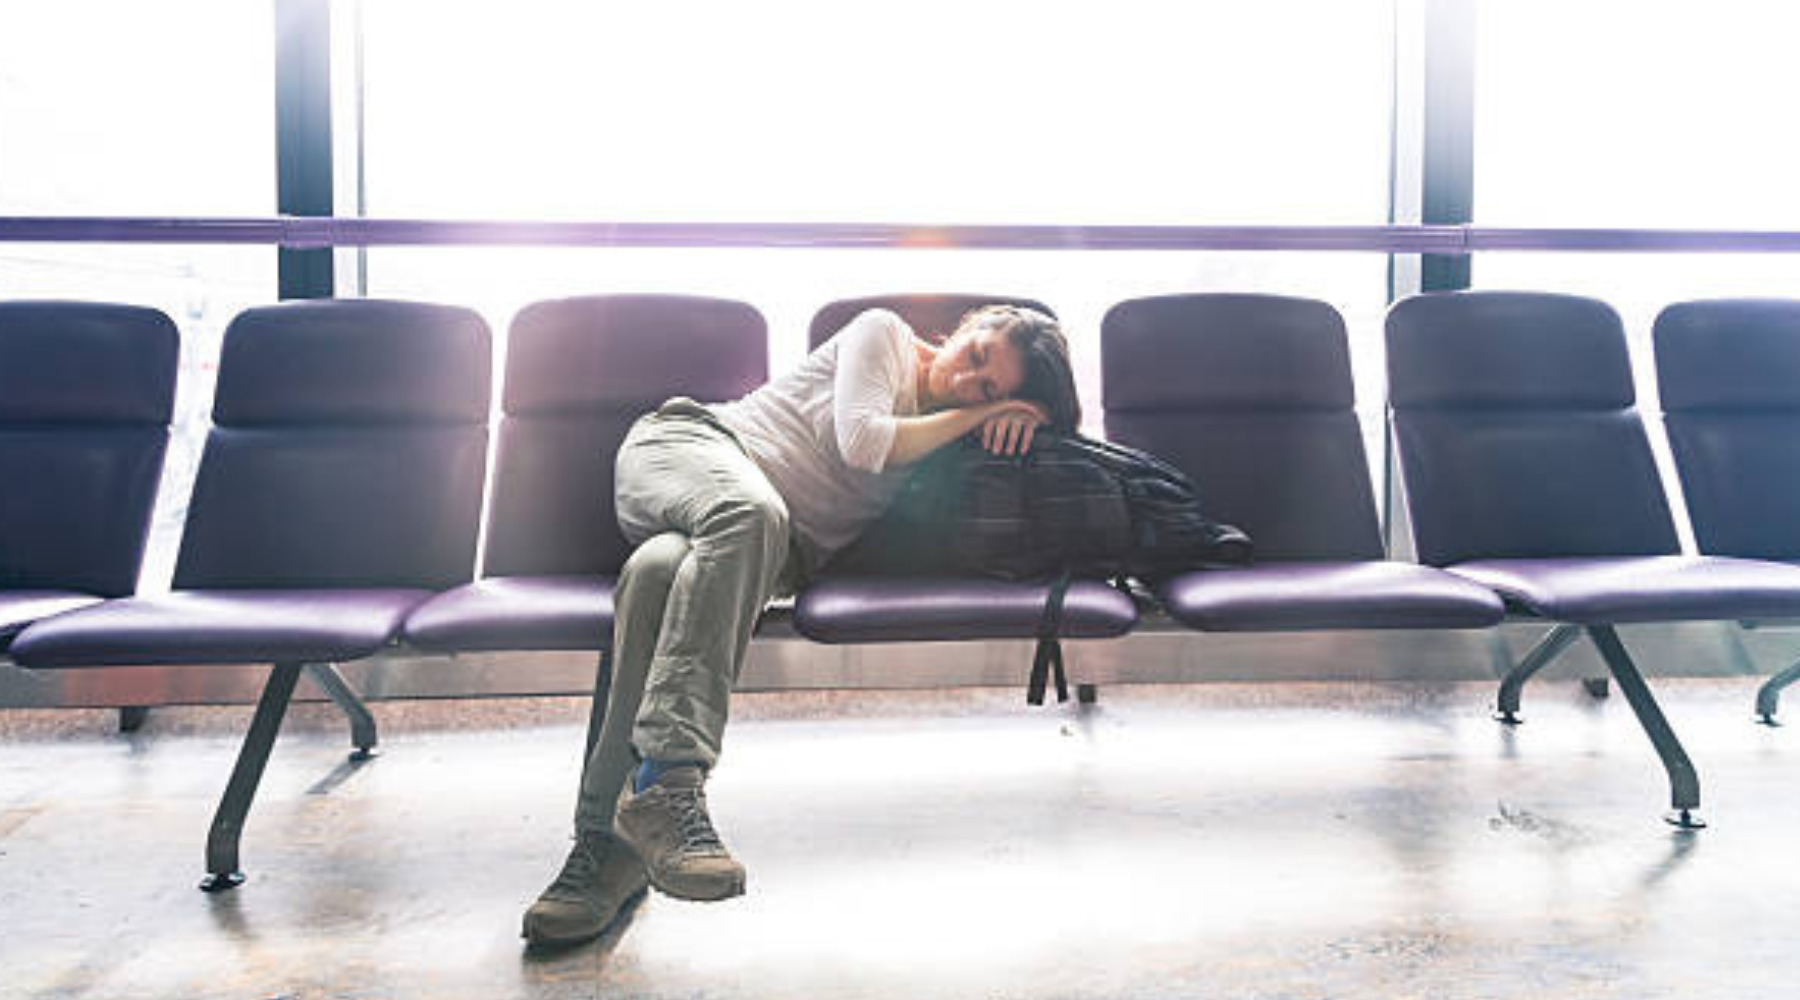 Woman in airport sleeping from jetlag 